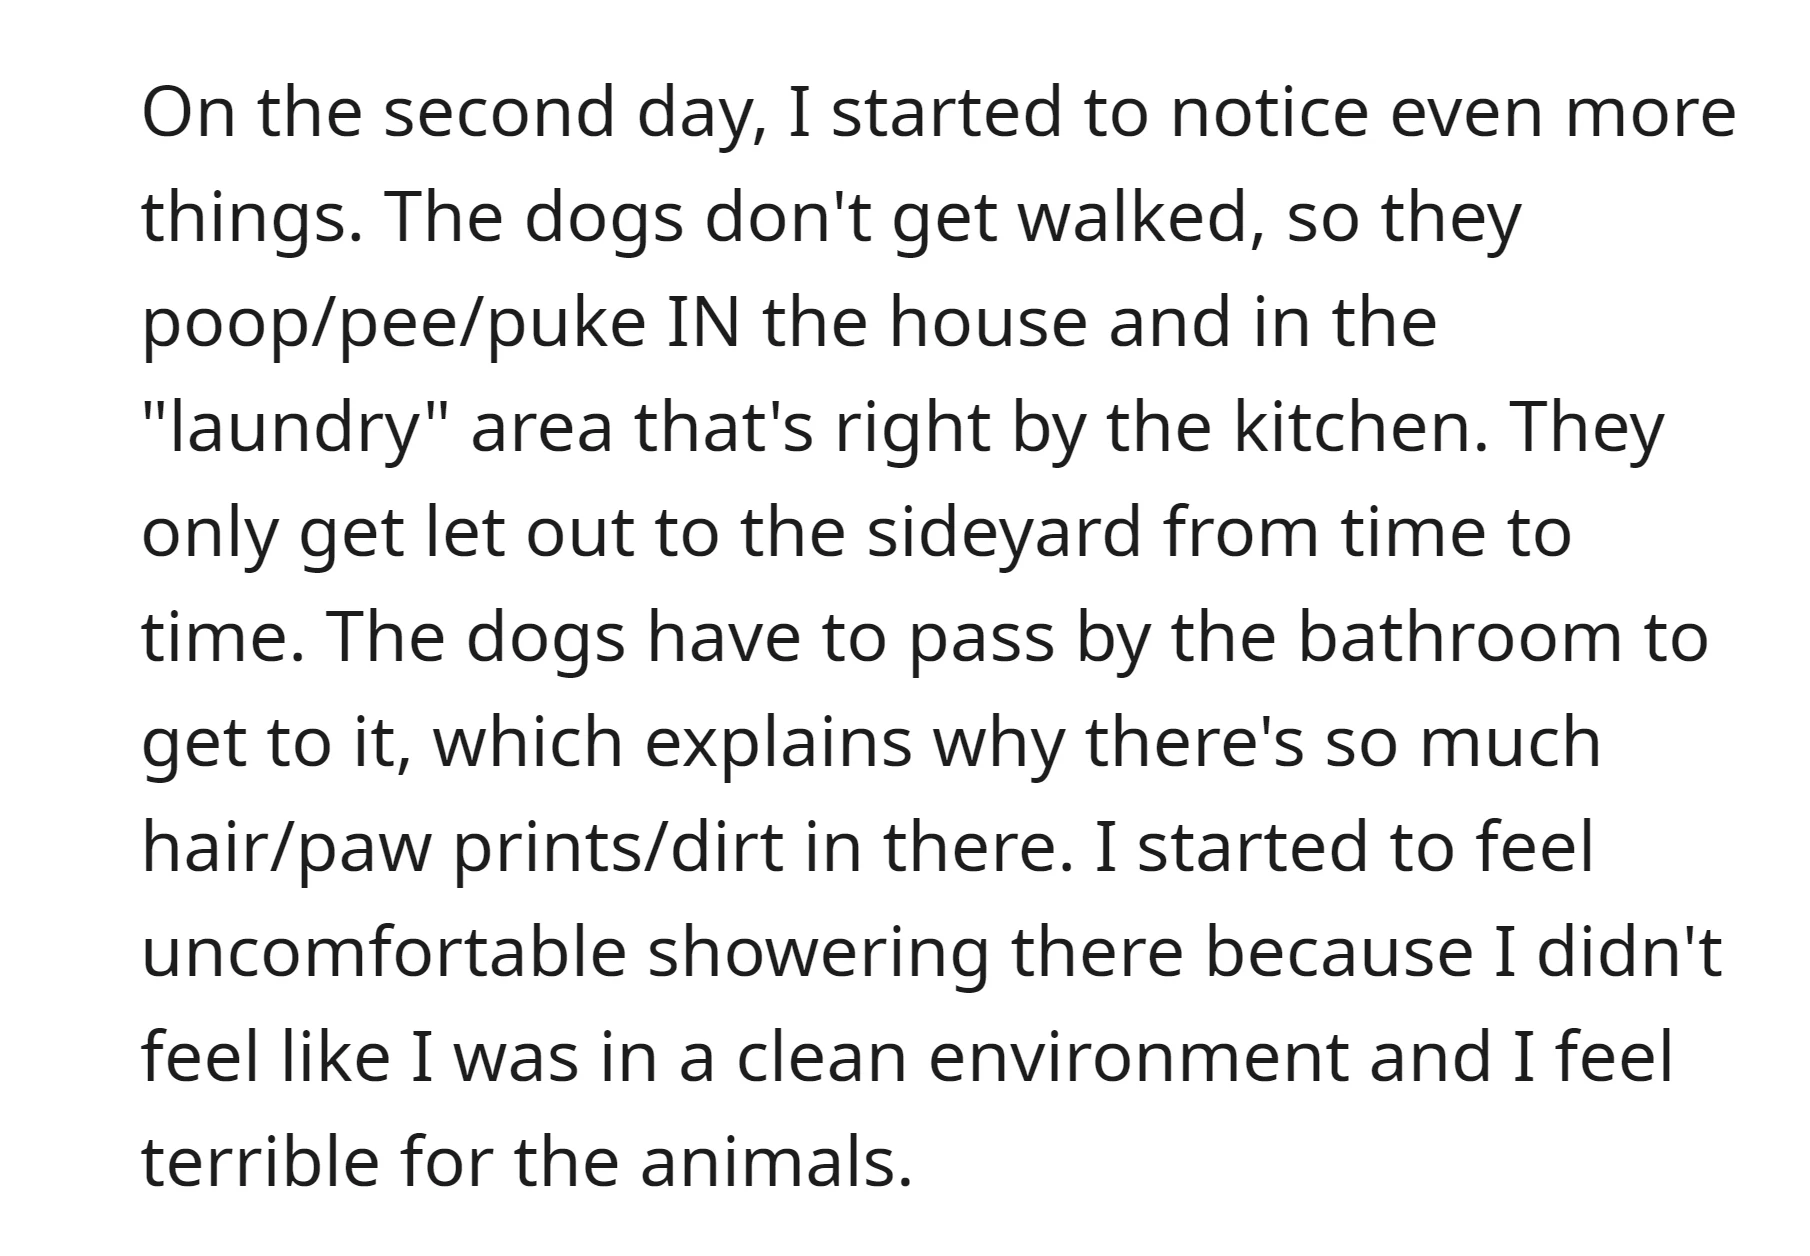 On the second day, the OP noticed the dogs in the house don't get walked, leading to messes inside